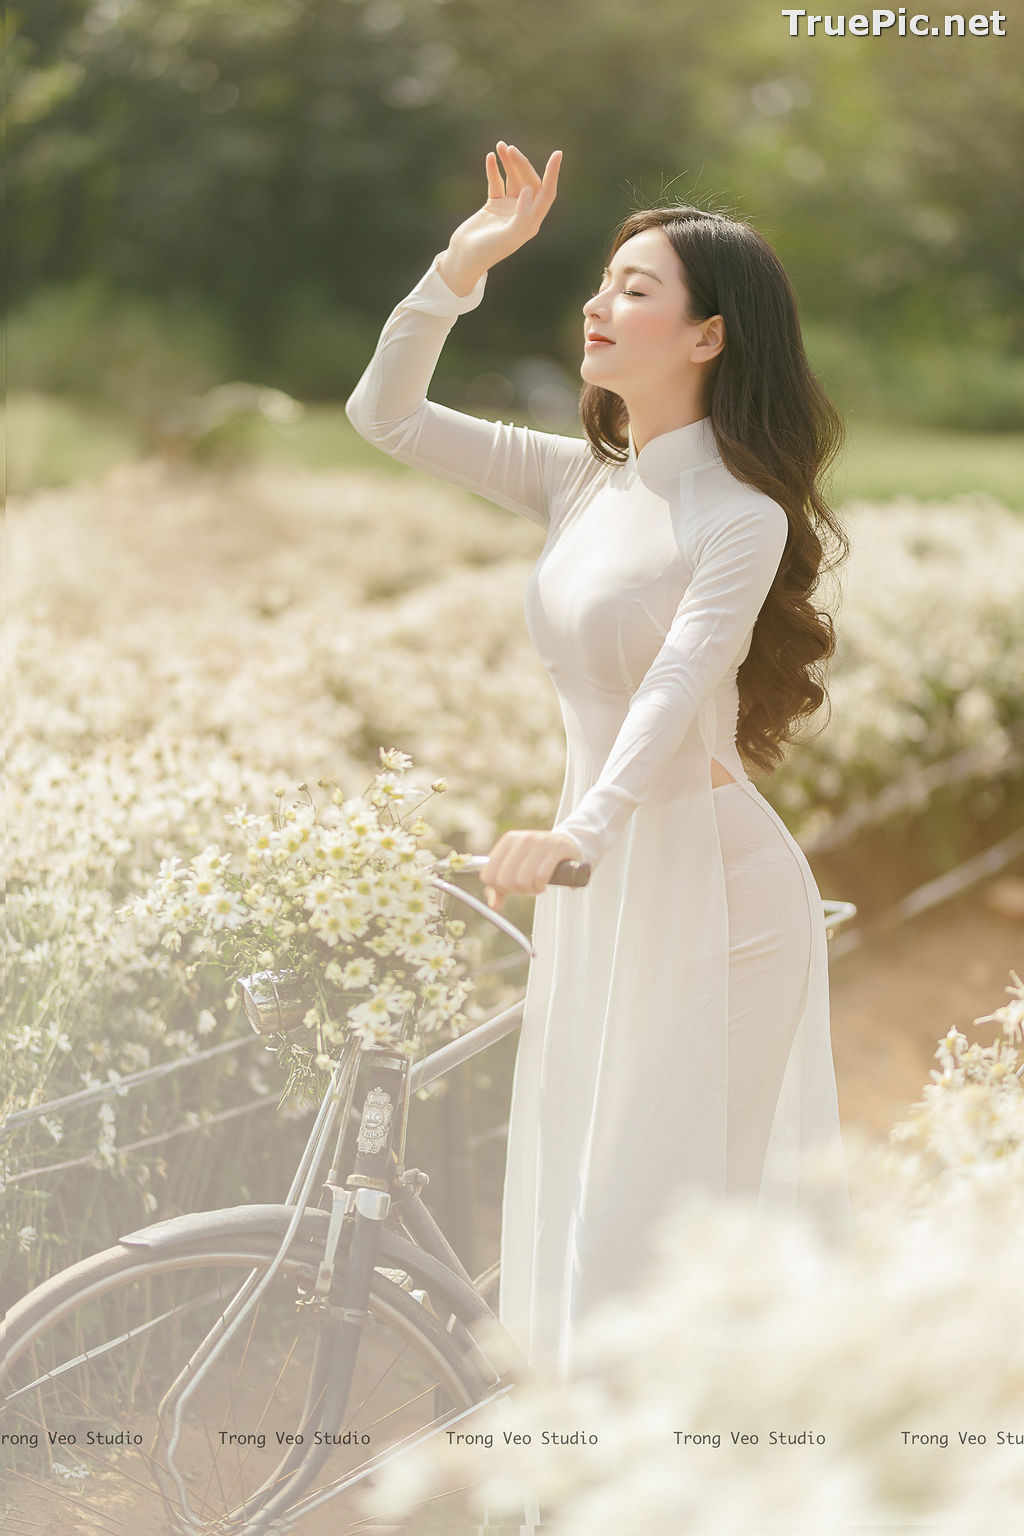 Image The Beauty of Vietnamese Girls with Traditional Dress (Ao Dai) #3 - TruePic.net - Picture-27